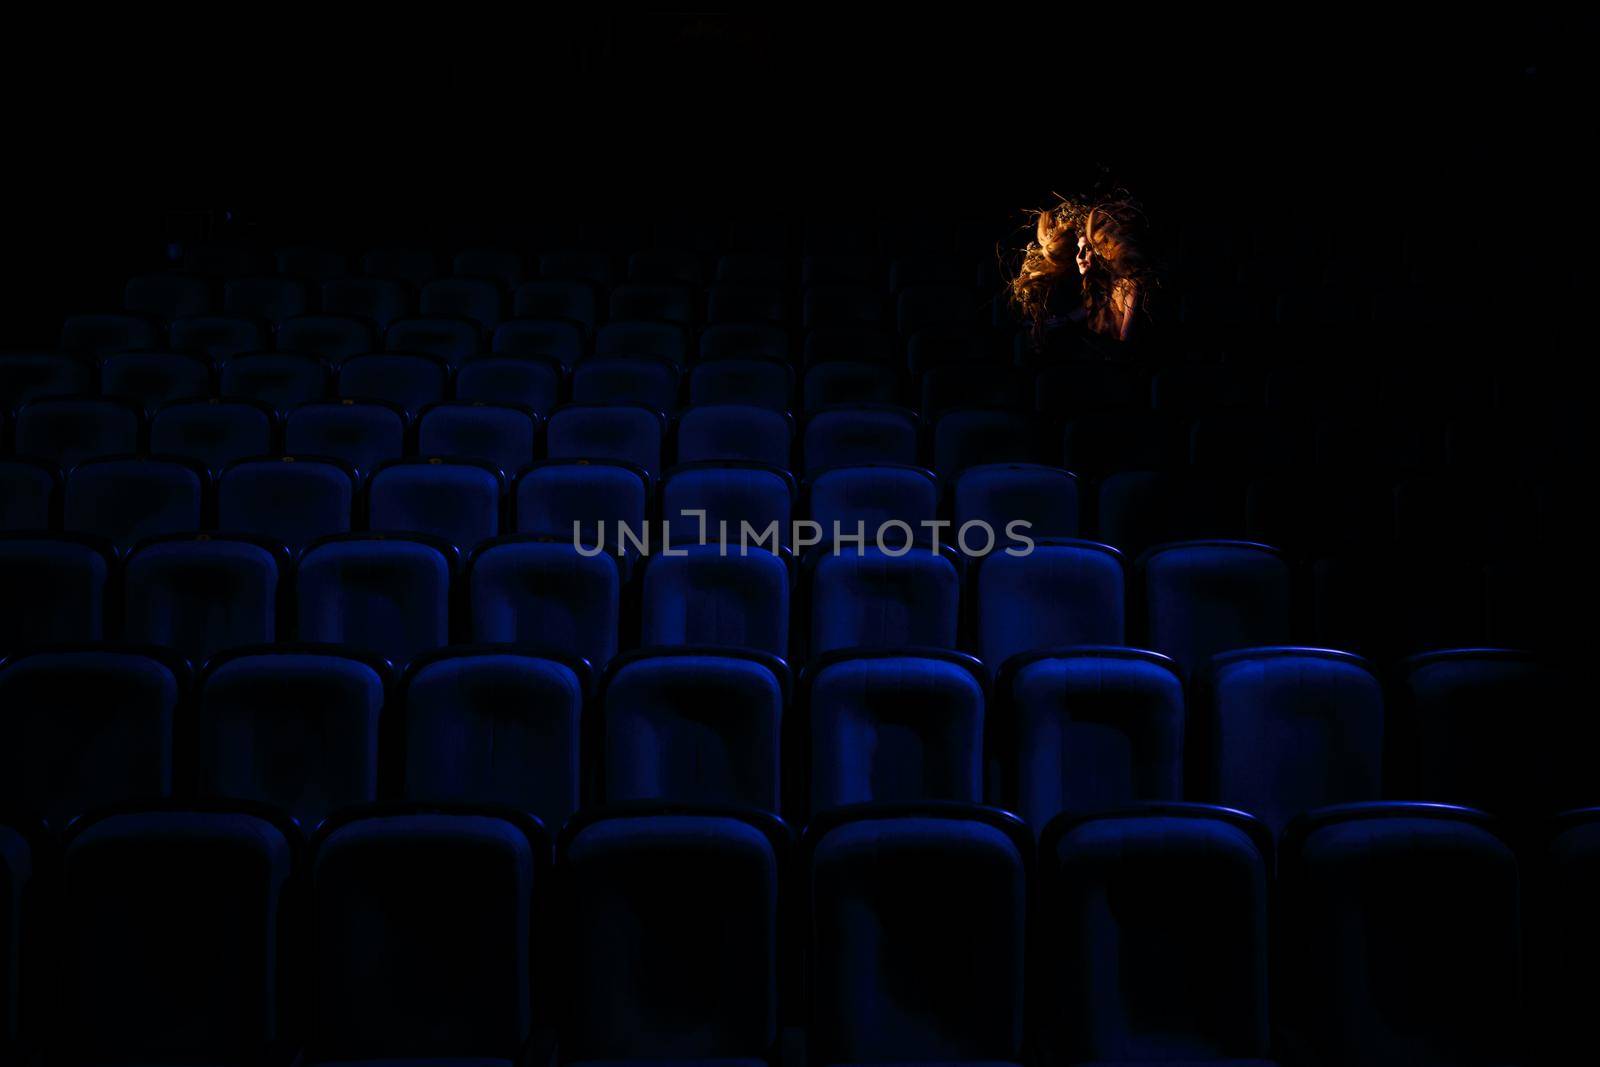 The girl who plays the role of a Ghost or spirit in the theater is sitting between the rows of chairs